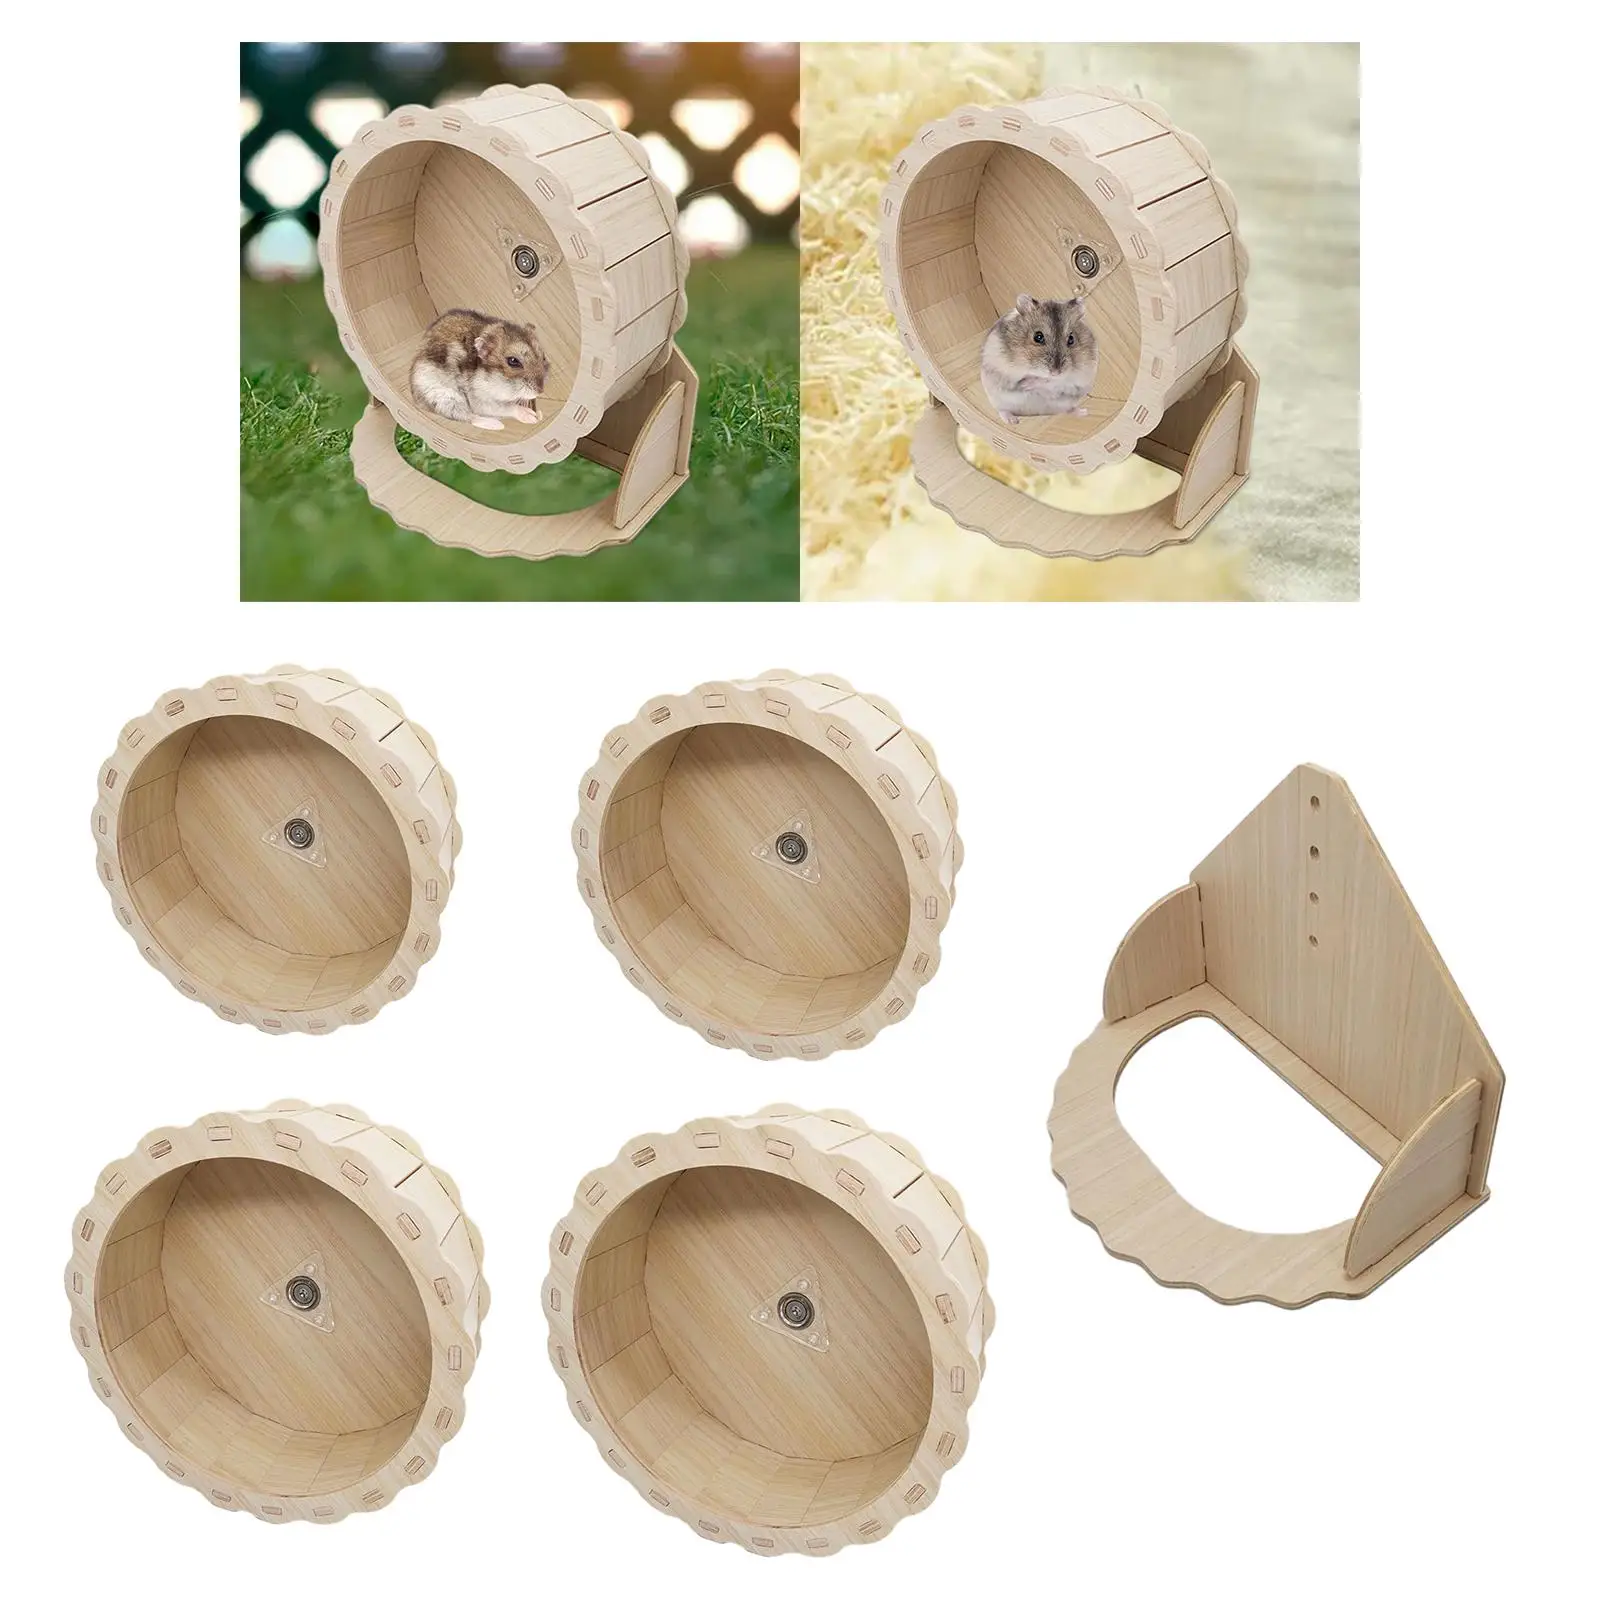 Hamster Wooden Running Wheel Silent Exercise Wheel Toy Small Pets Pet Supplies for Gerbils Other Small Animals Chinchilla Rat